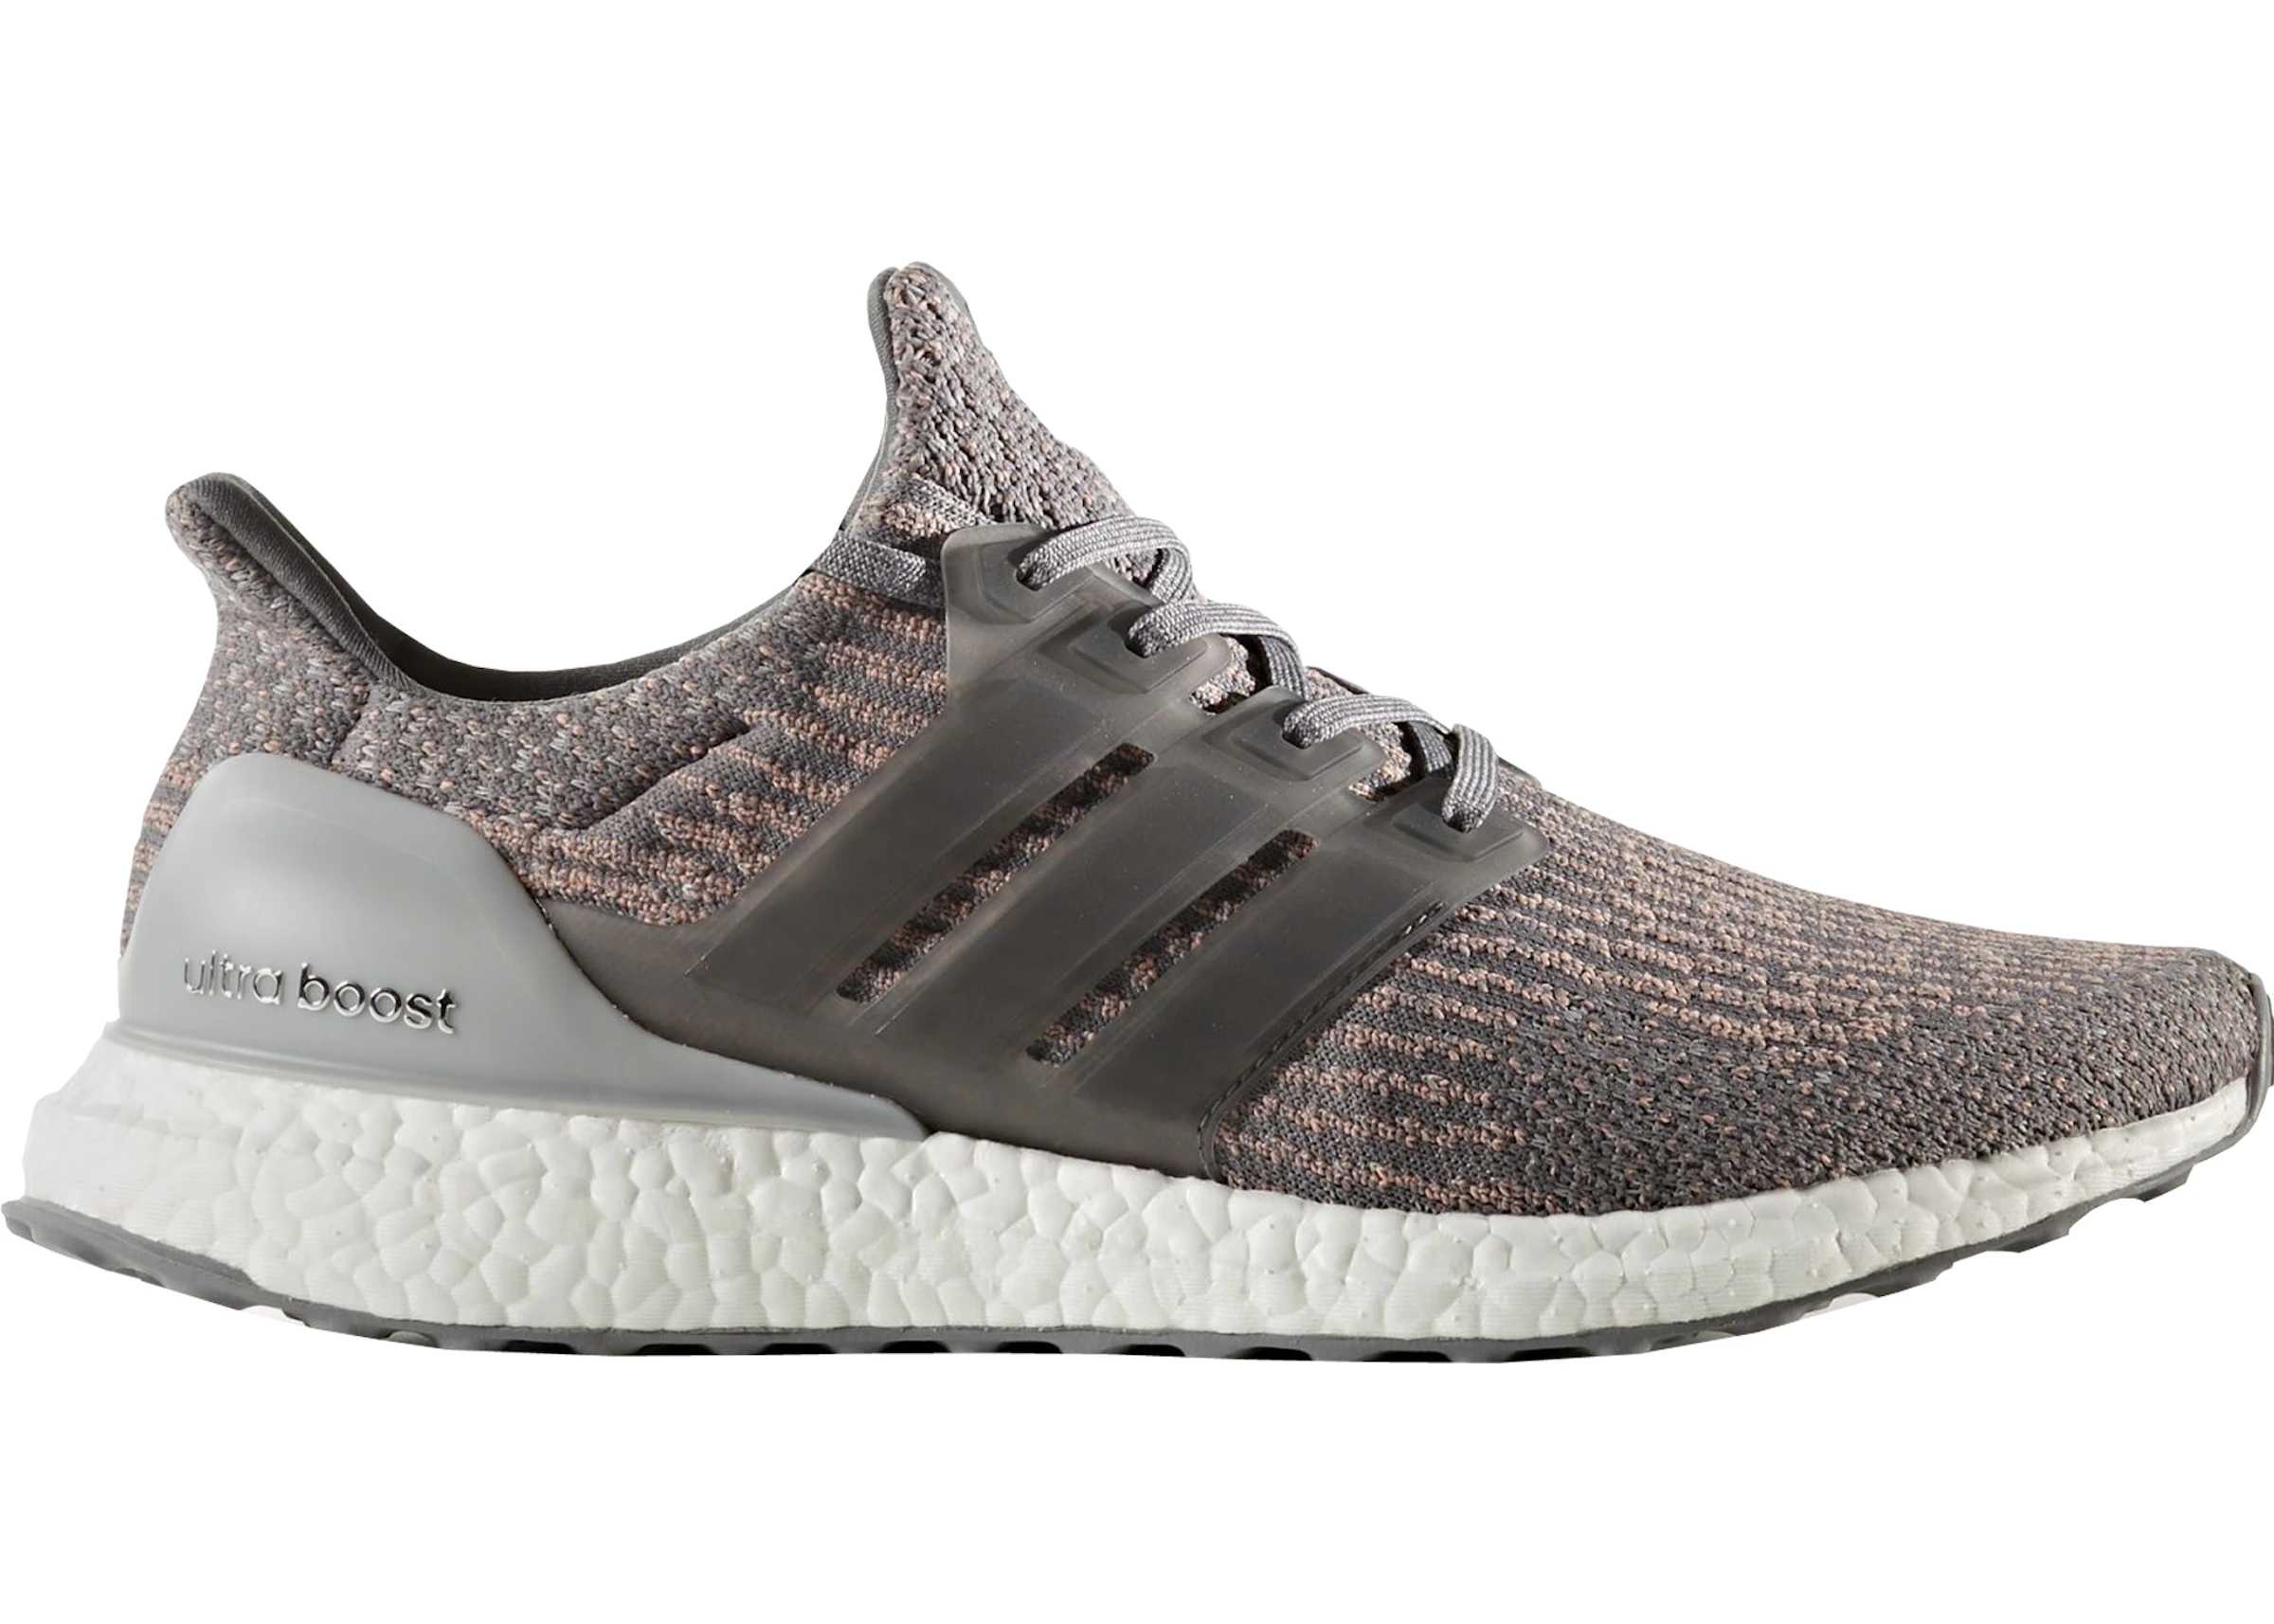 Dalset Vreemdeling Staat Buy adidas Ultra Boost 3.0 Shoes & New Sneakers - StockX